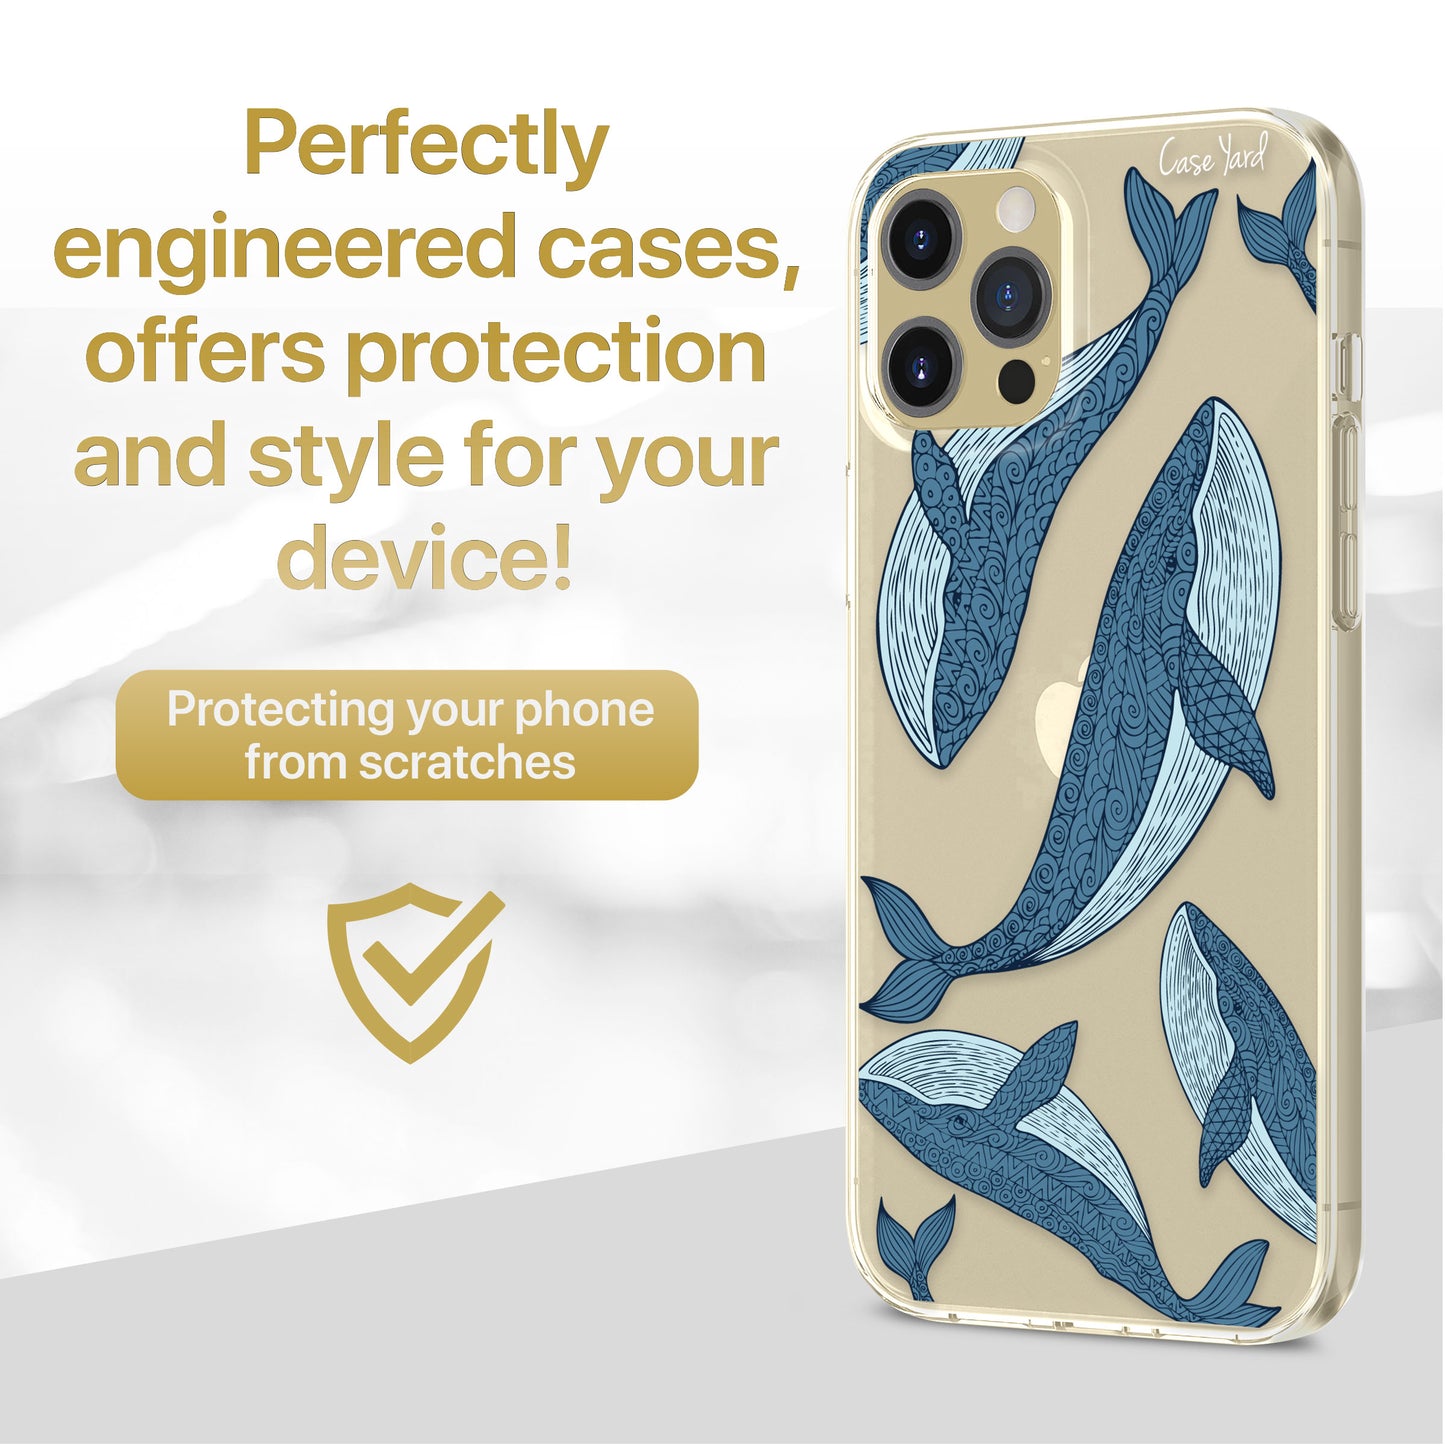 TPU Clear case with (Blue Whales) Design for iPhone & Samsung Phones